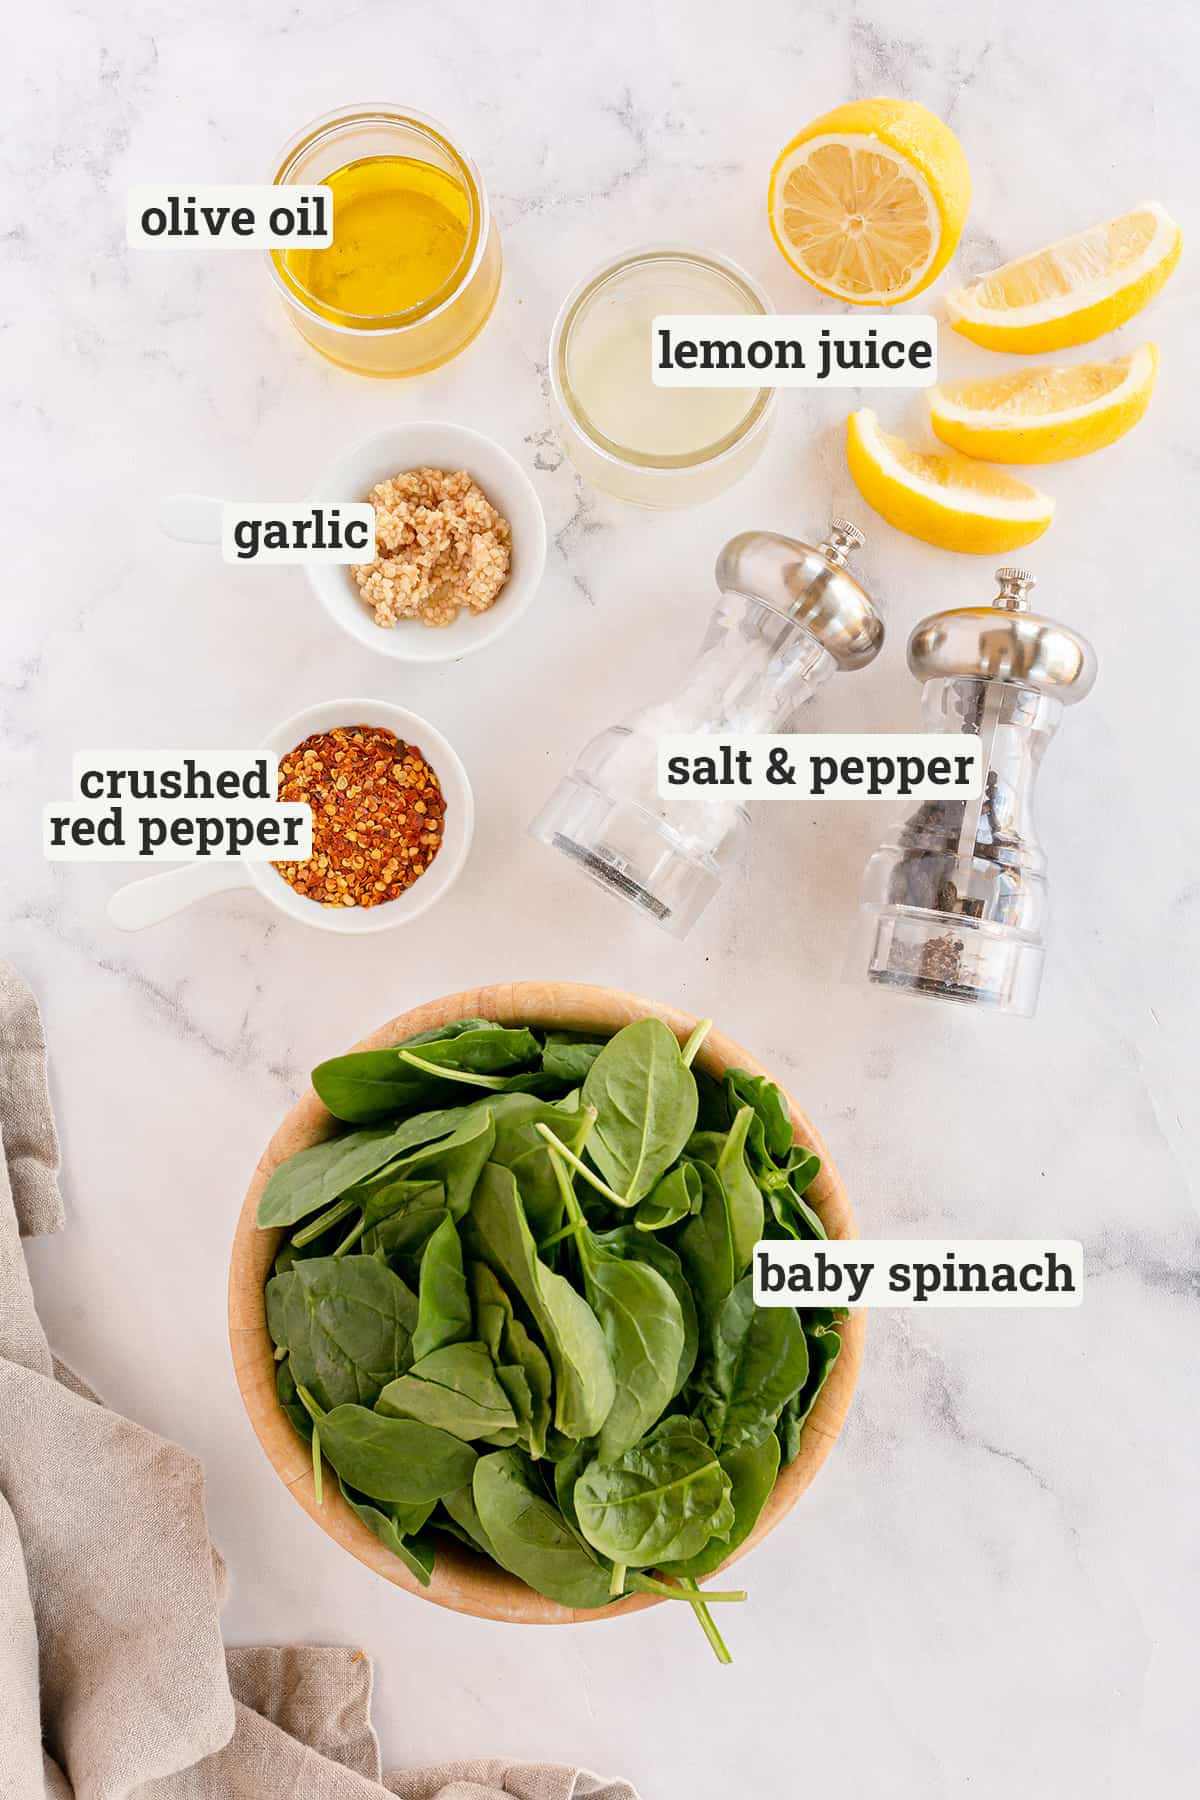 The ingredients for Sauteed Spinach with text overlay.